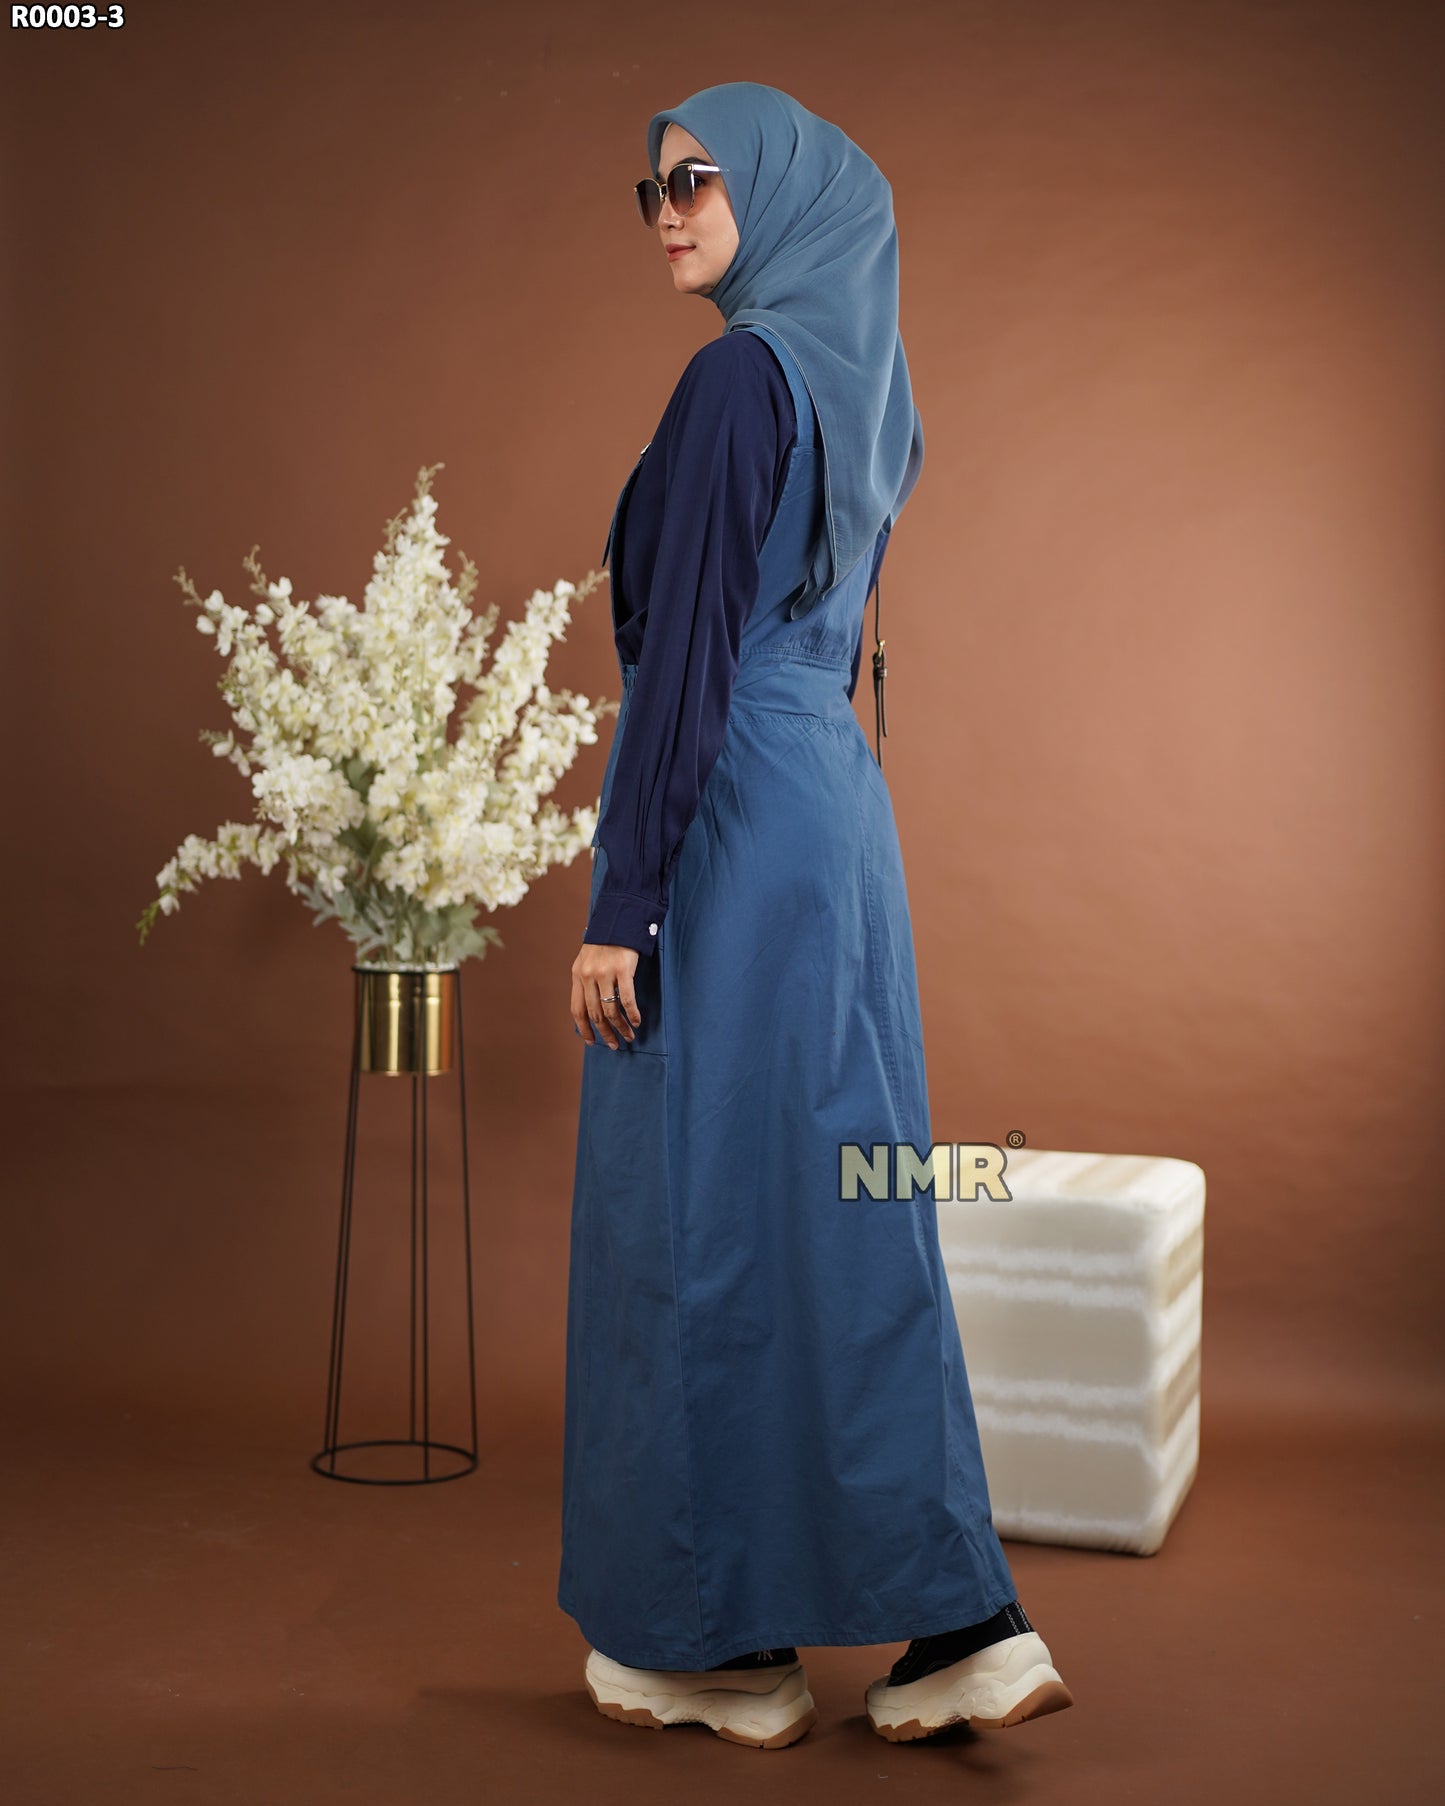 NMR Gamis Jumpsuit Overall Baby Canvas Vol R003-3